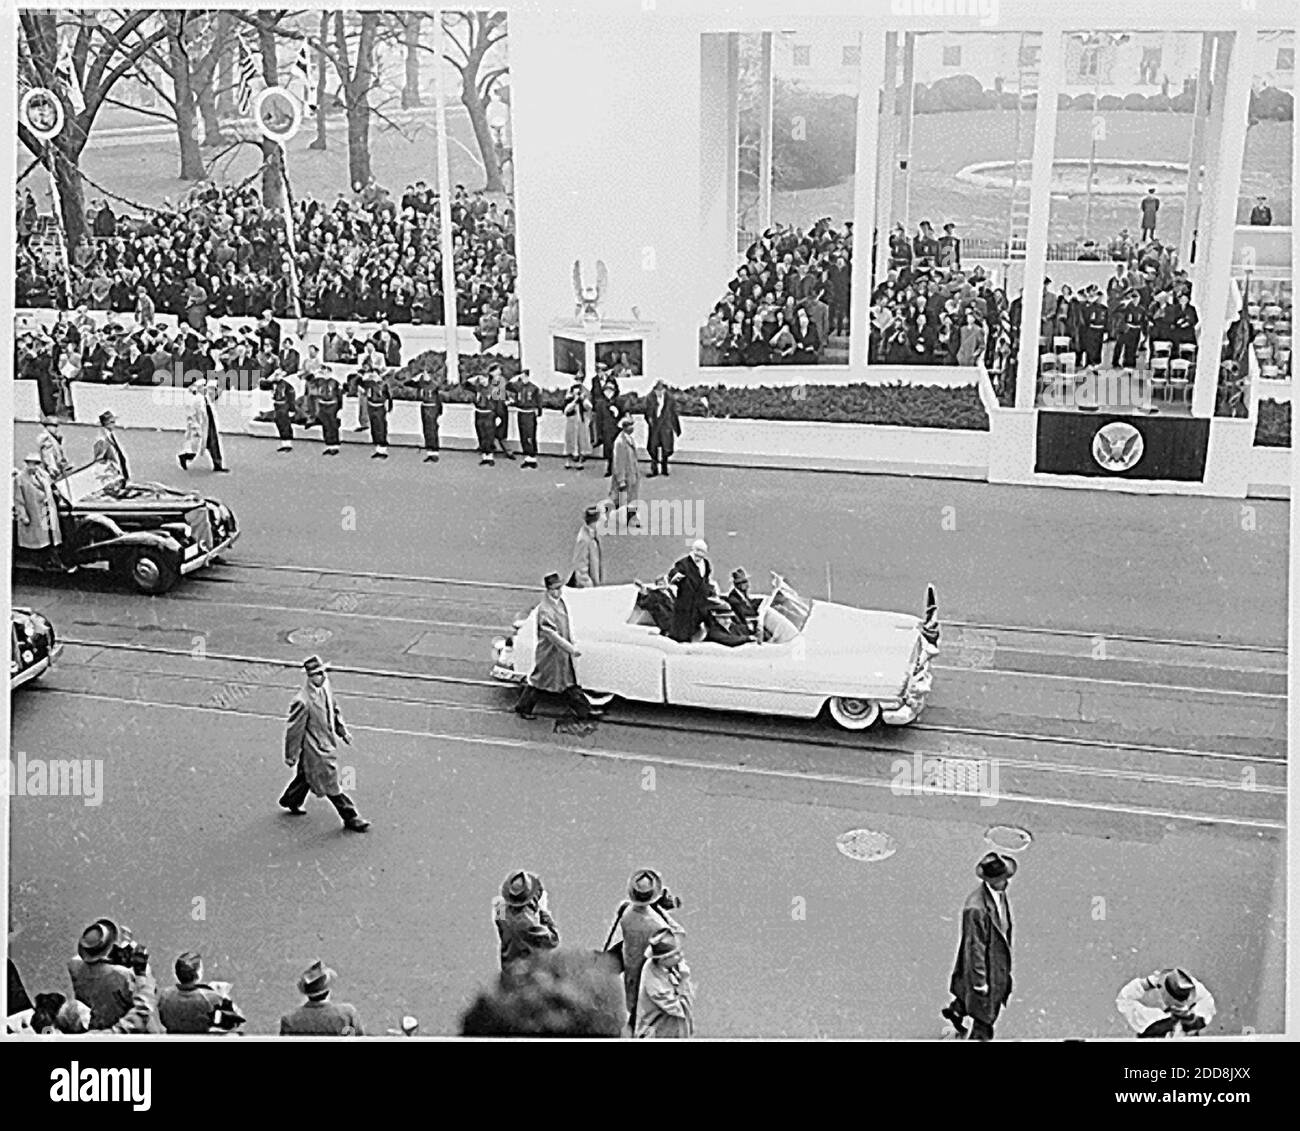 NO FILM, NO VIDEO, NO TV, NO DOCUMENTARY - US President Dwight D. Eisenhower and first lady Mamie Eisenhower wave to the crowd as they ride in the inaugural parade in Washington, D.C., USA on January 20, 1953. Photo by (National Archives/MCT/ABACAPRESS.COM Stock Photo